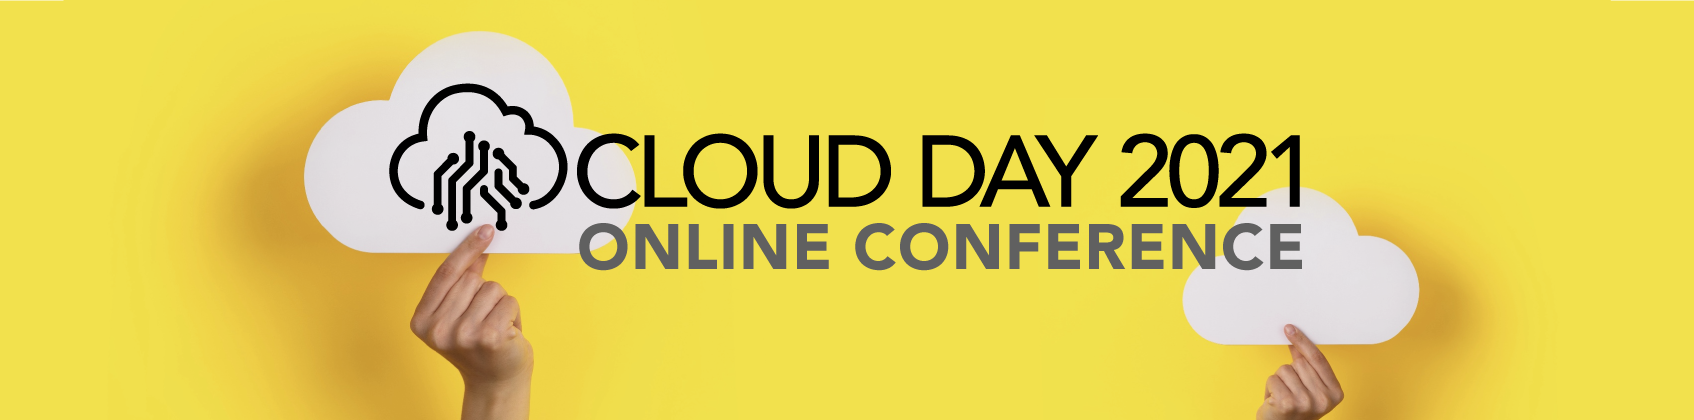 Banner dell'evento Cloud Day 2021